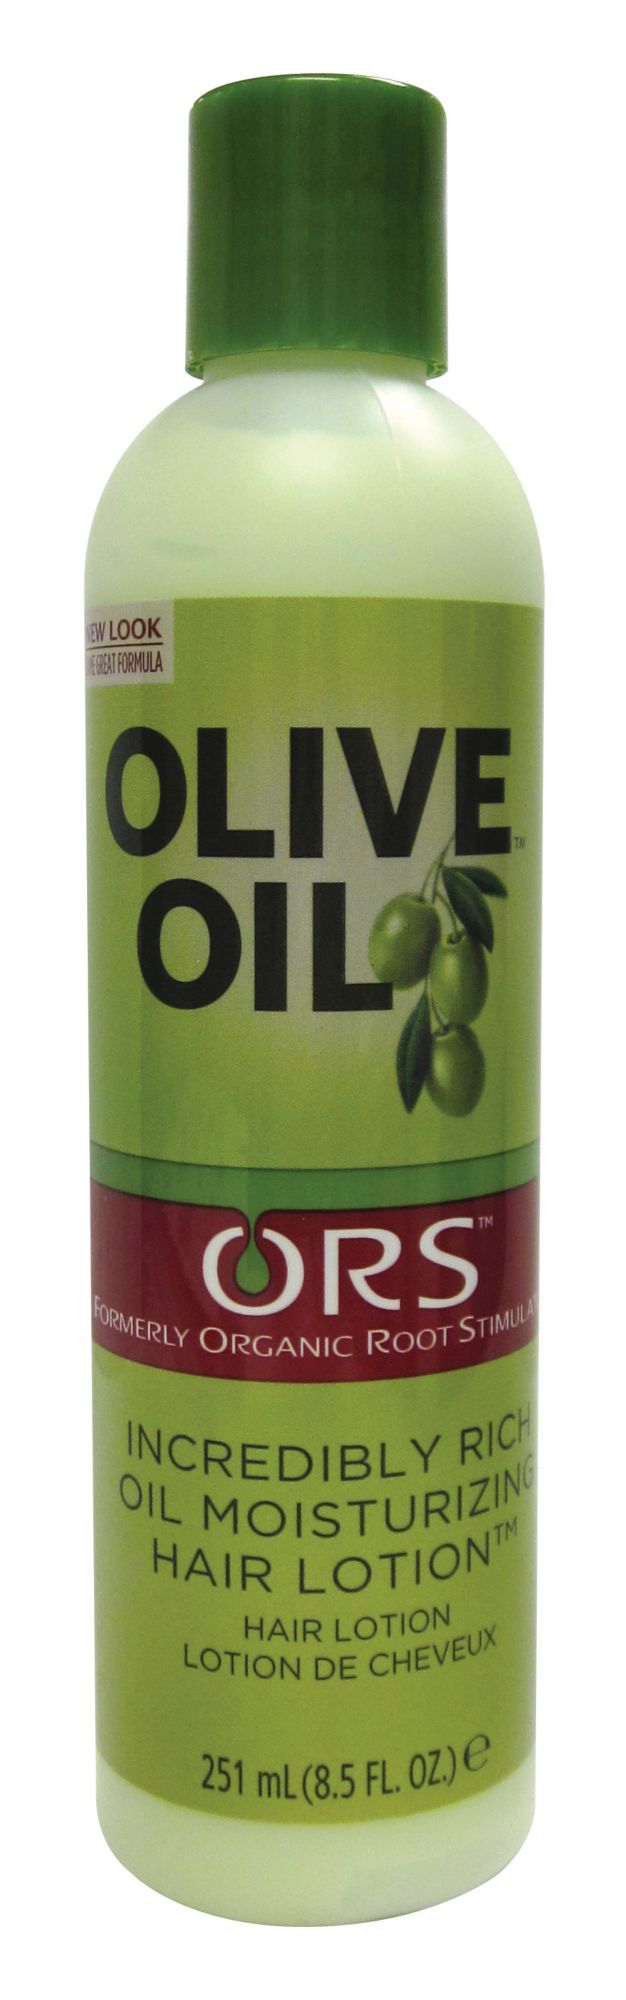 ORS Olive Oil Incredibly Rich Oil Moisturizing Hair Lotion 8.5 oz